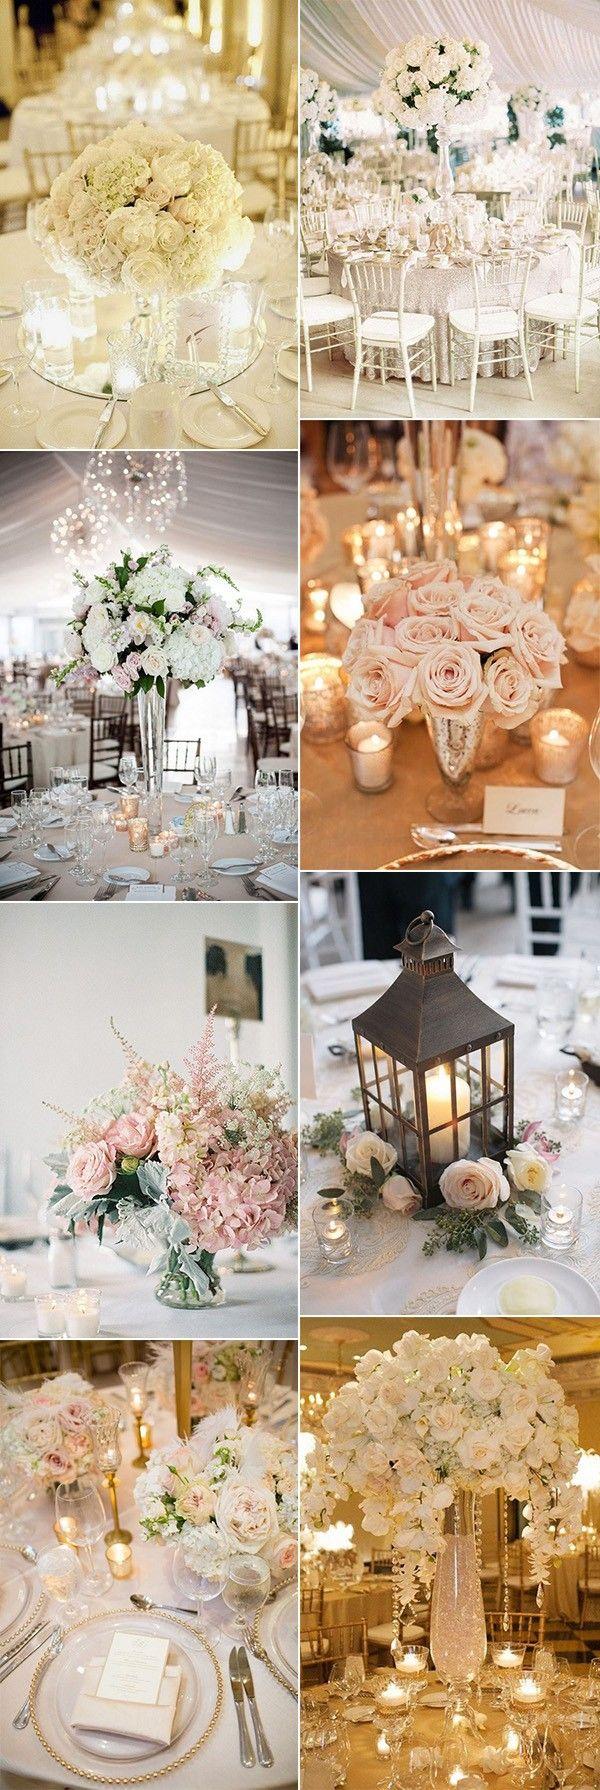 Mariage - 18 Elegant Wedding Centerpiece Ideas For 2018 Trends - Page 2 Of 2